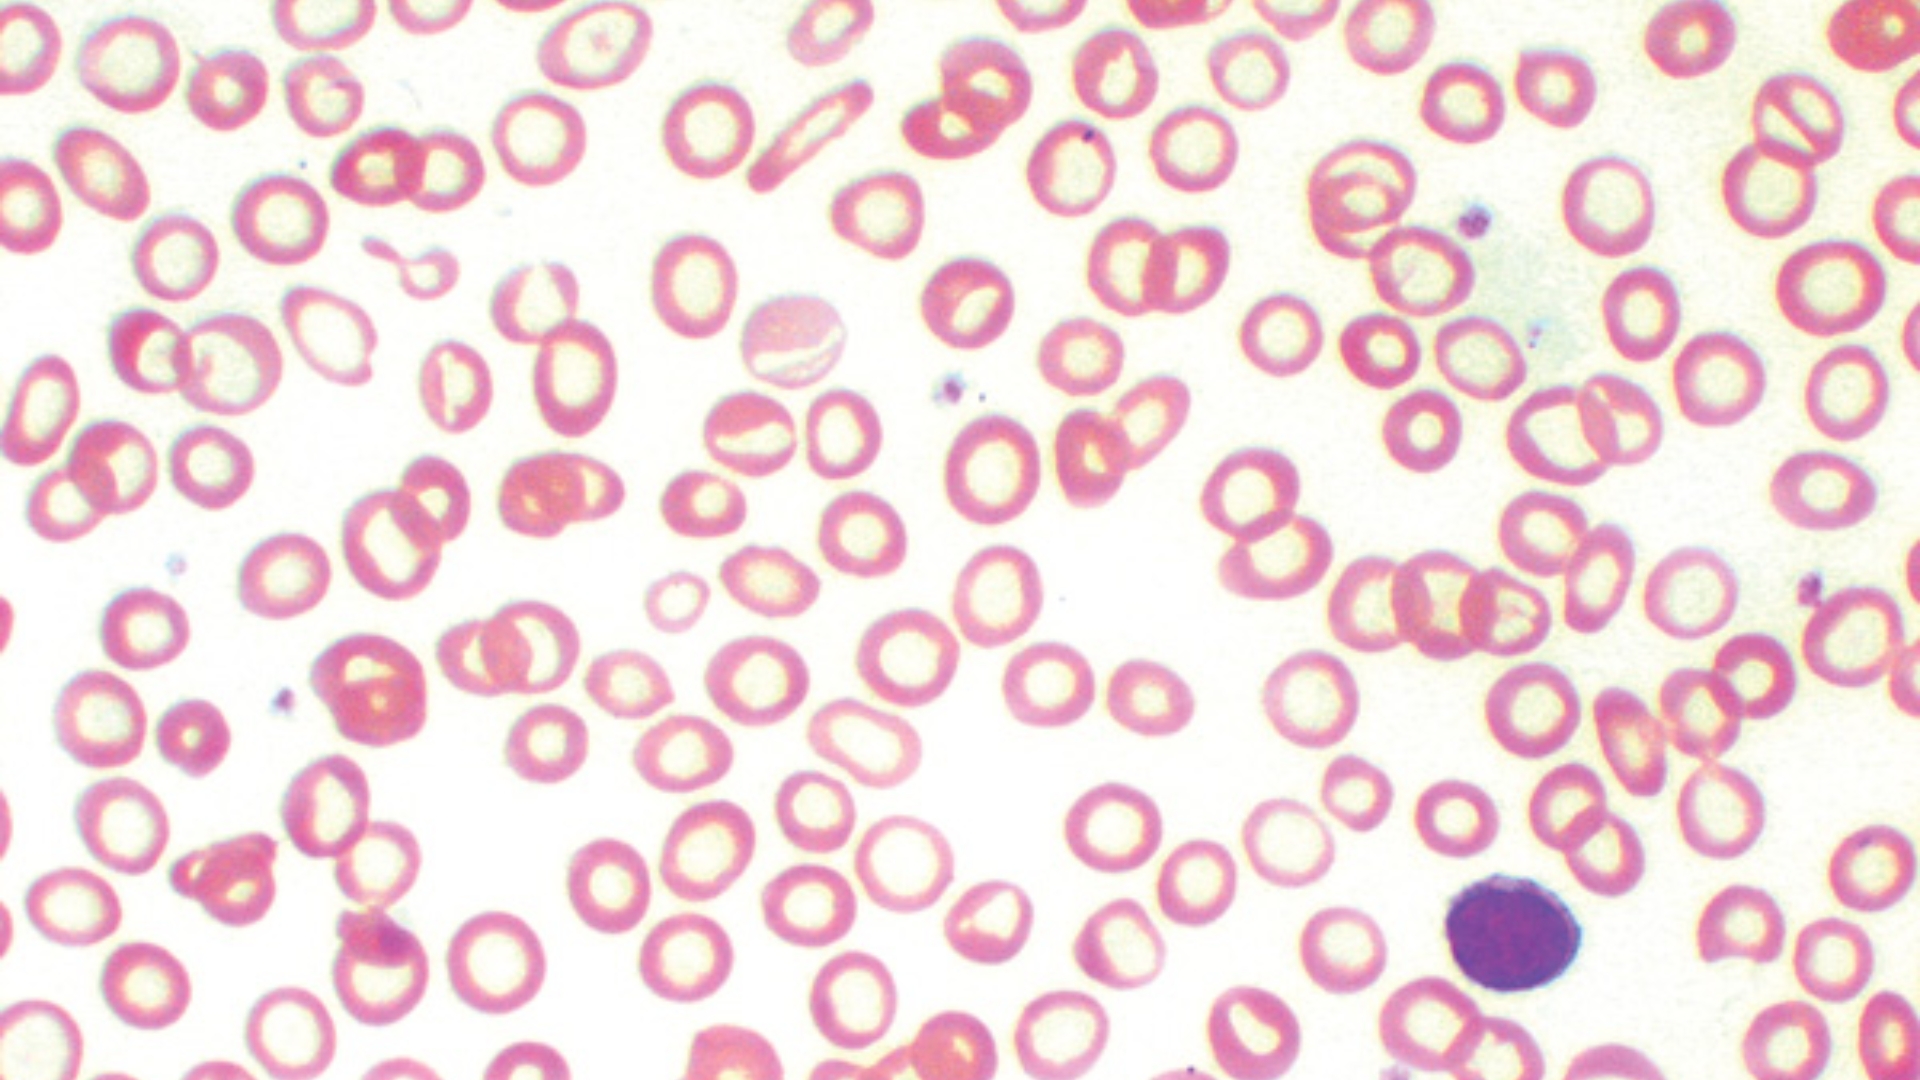 CPD: The Effect of Iron Deficiency on Red Cell Indices and Morphology